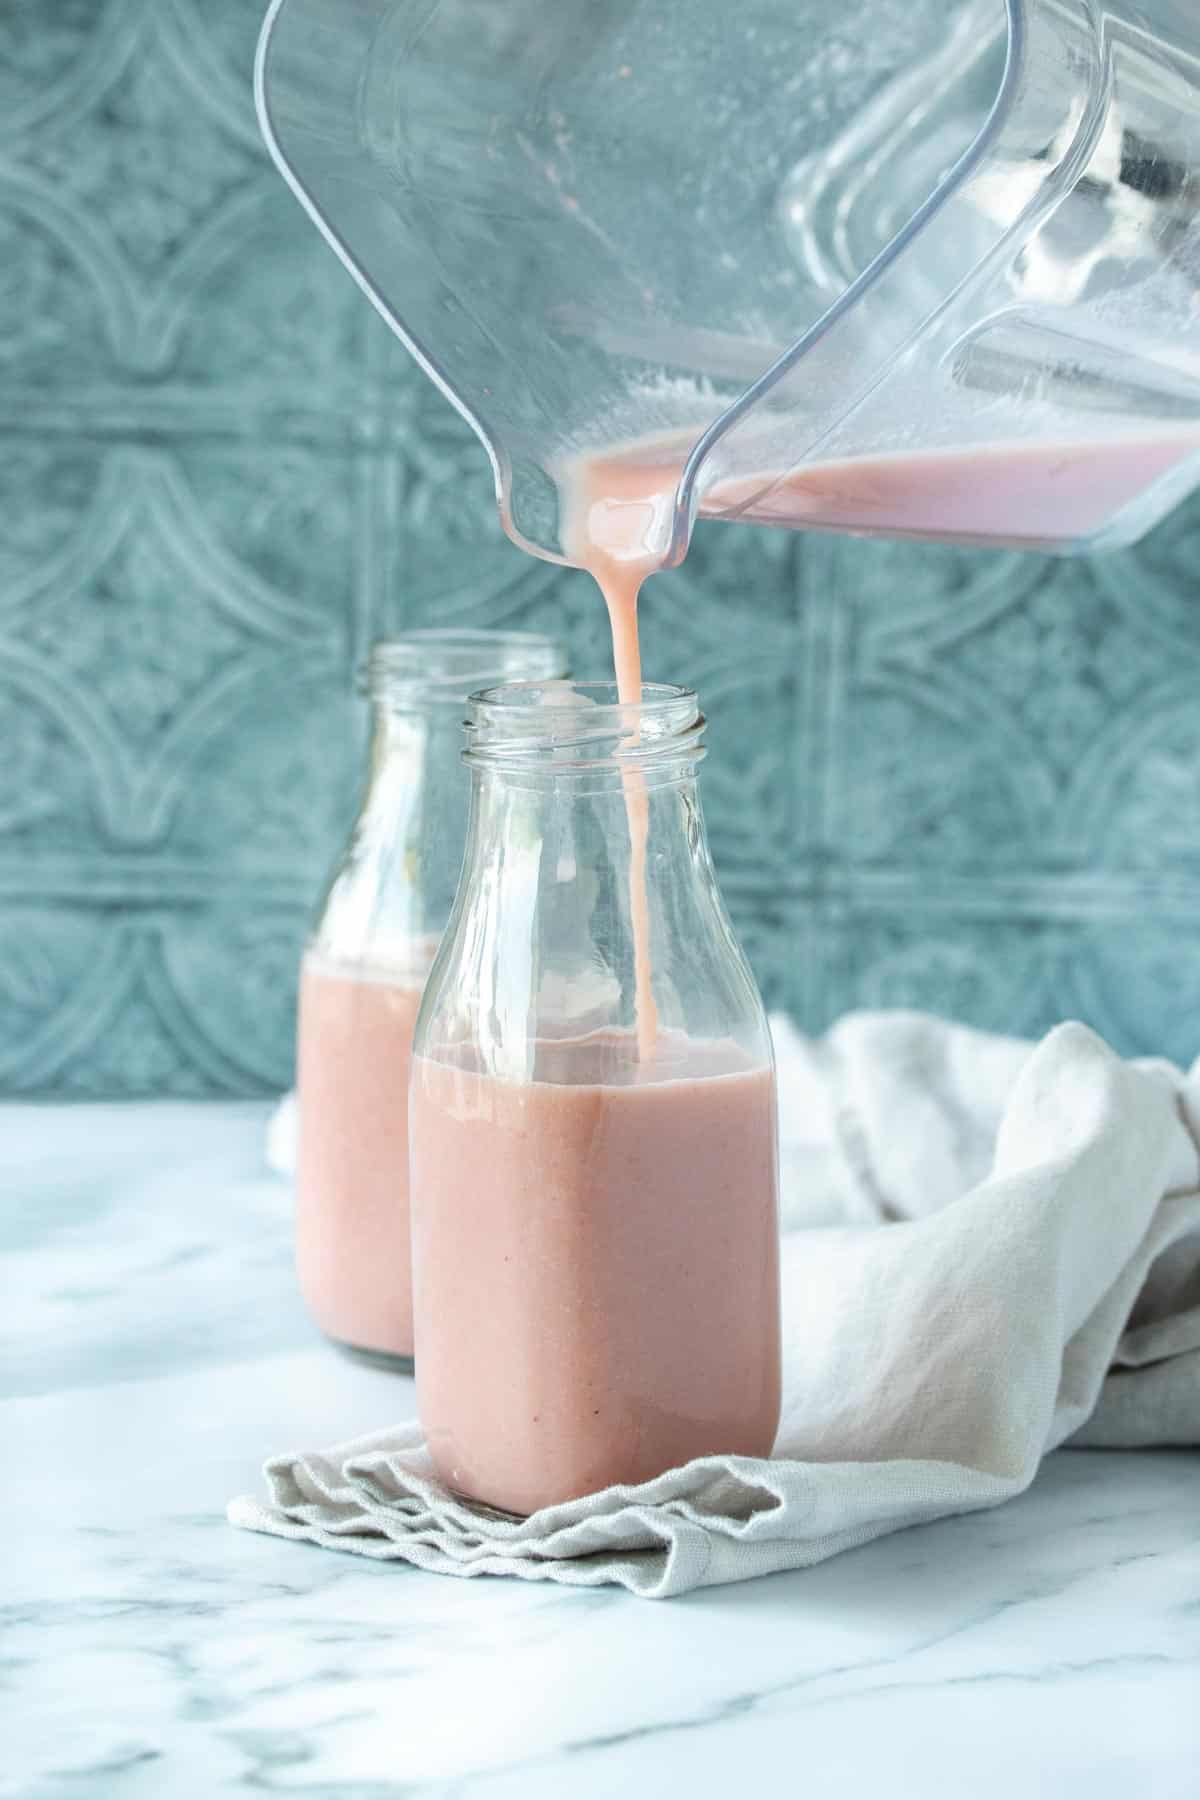 A blender pouring a pink milk into a glass milk jar in front of a full jar